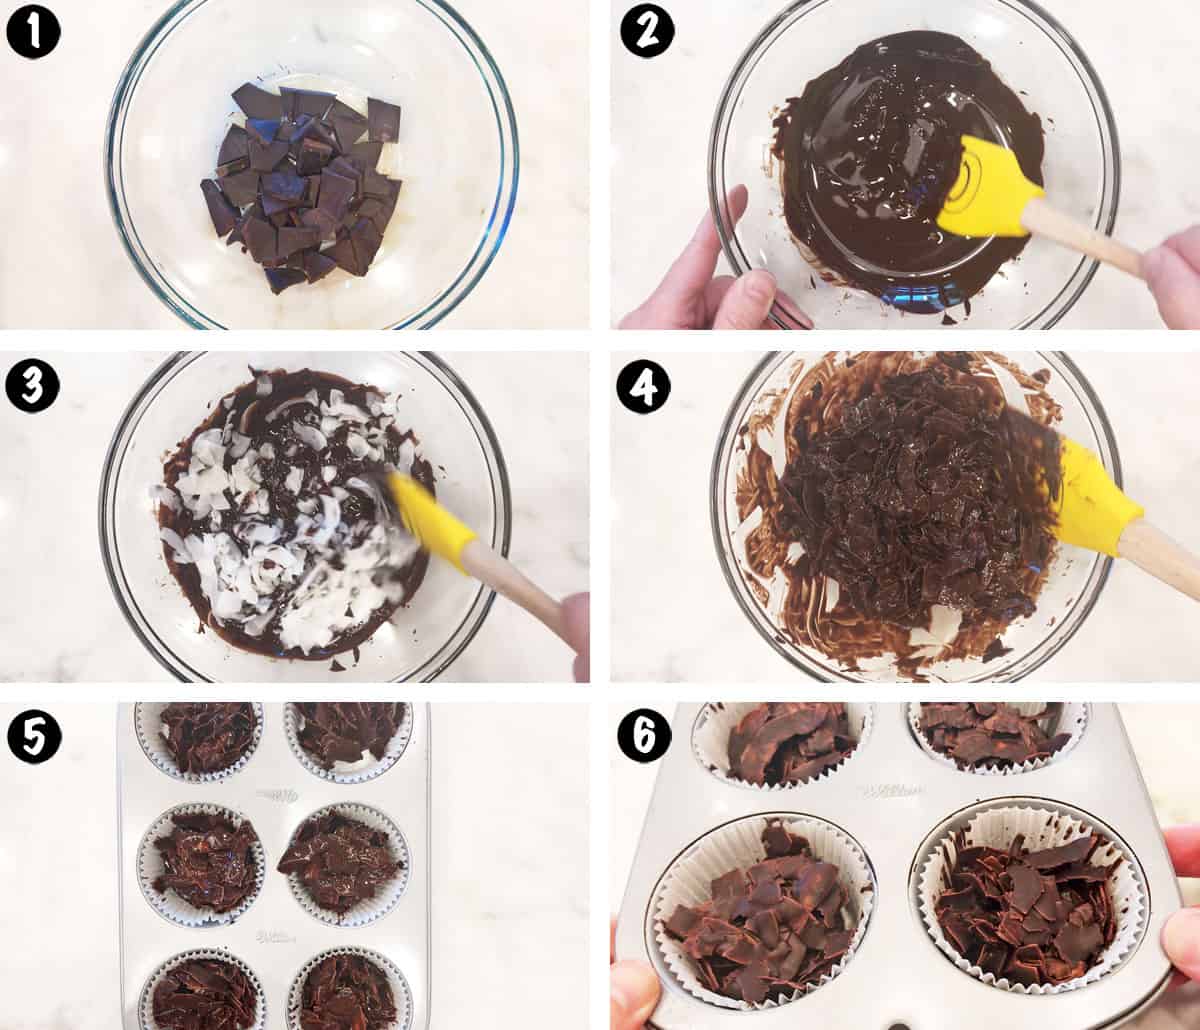 A six-photo collage showing the steps for making coconut clusters.